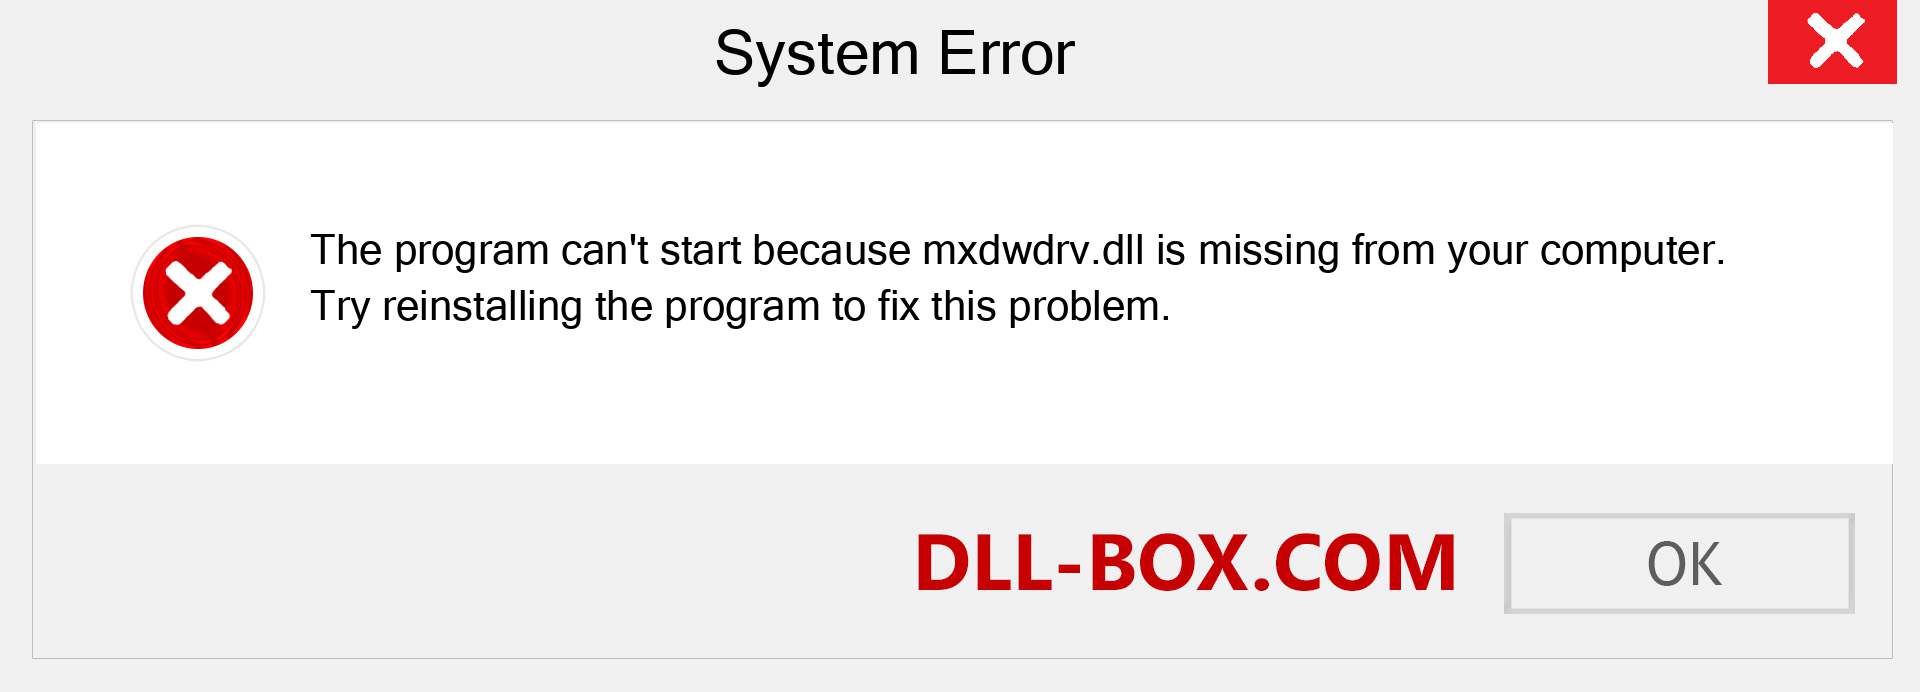  mxdwdrv.dll file is missing?. Download for Windows 7, 8, 10 - Fix  mxdwdrv dll Missing Error on Windows, photos, images